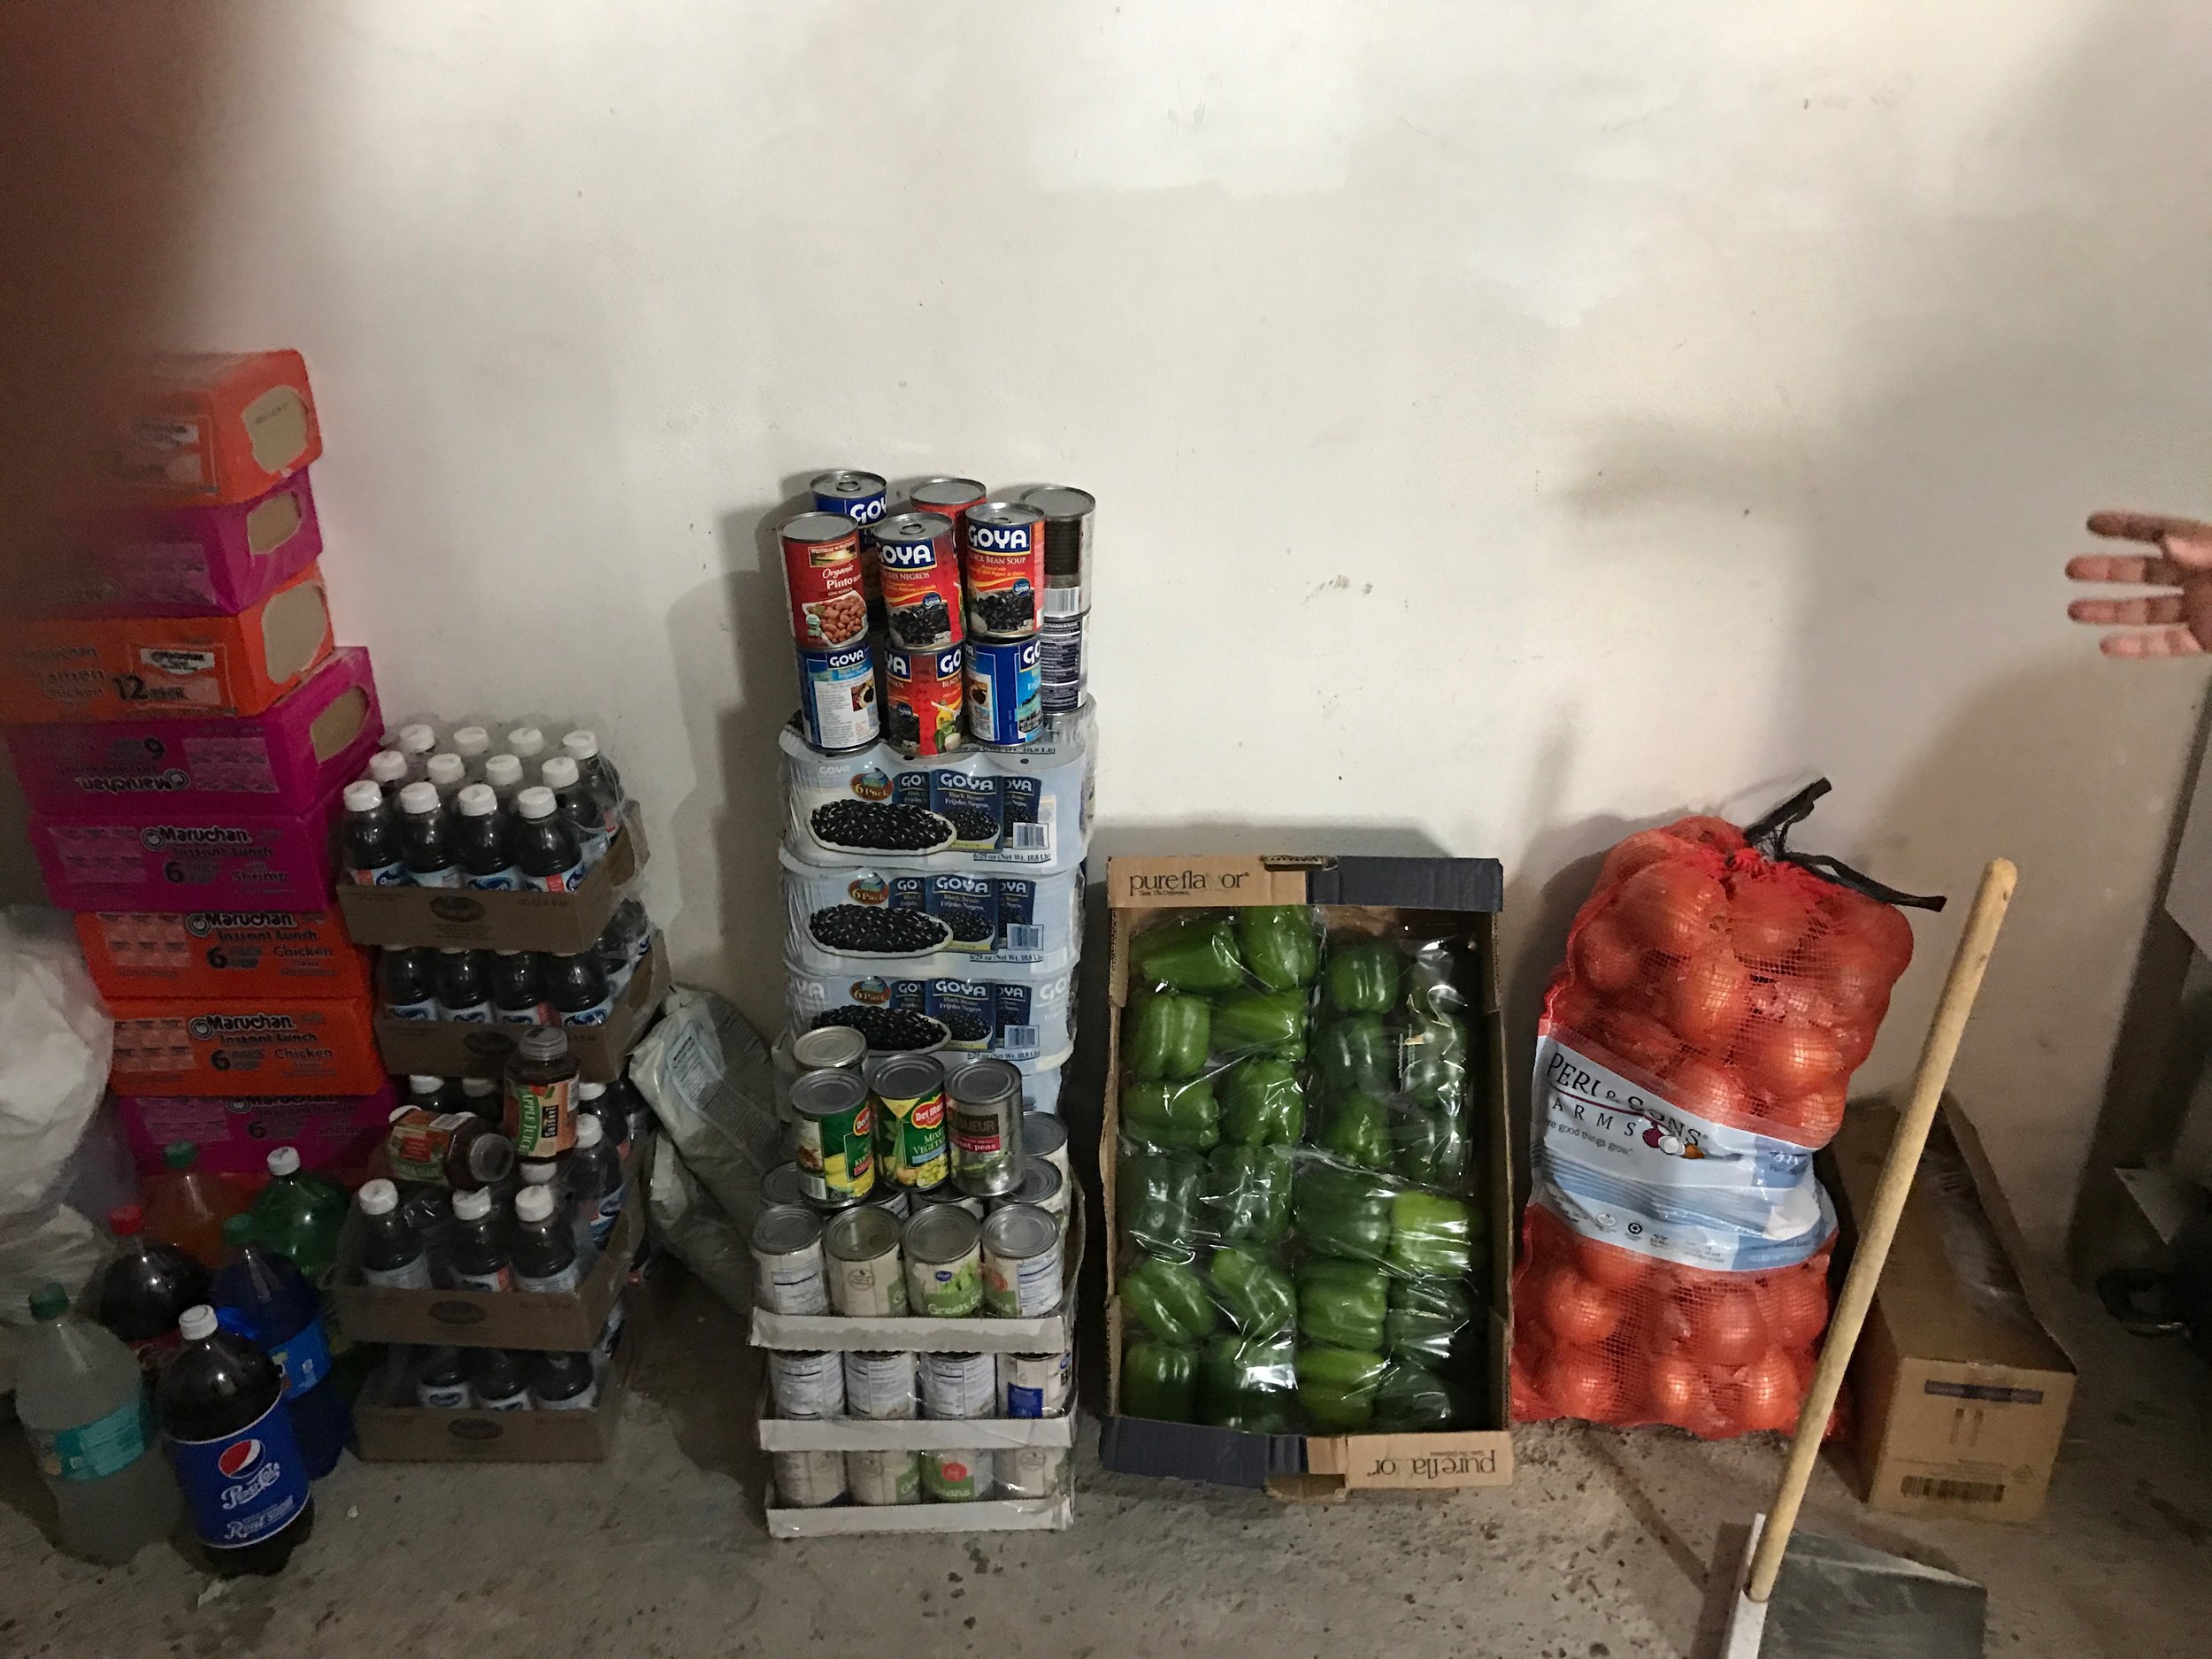  Food stock at the Baptist Church in Nuevo Laredo. The church has provided its’ for cooking meals feeding 300 persons or so. Currently, one meal per day is provided. Iglesia Metodista El Divino Salvador in Nuevo Laredo is now in place to provide cook